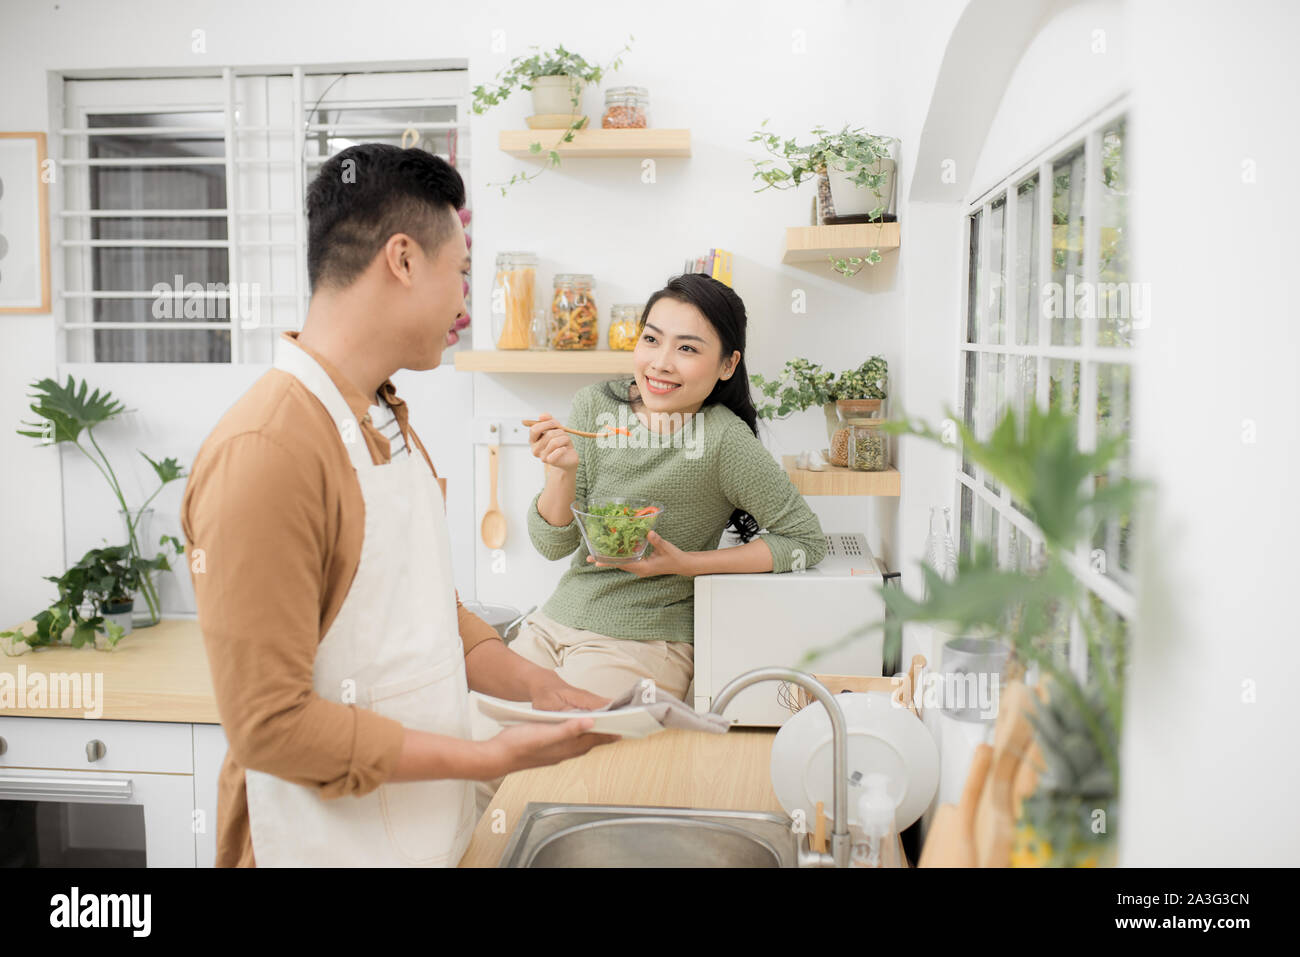 Asian couple eating breakfast early in the morning in the kitchen and having a good time. Stock Photo